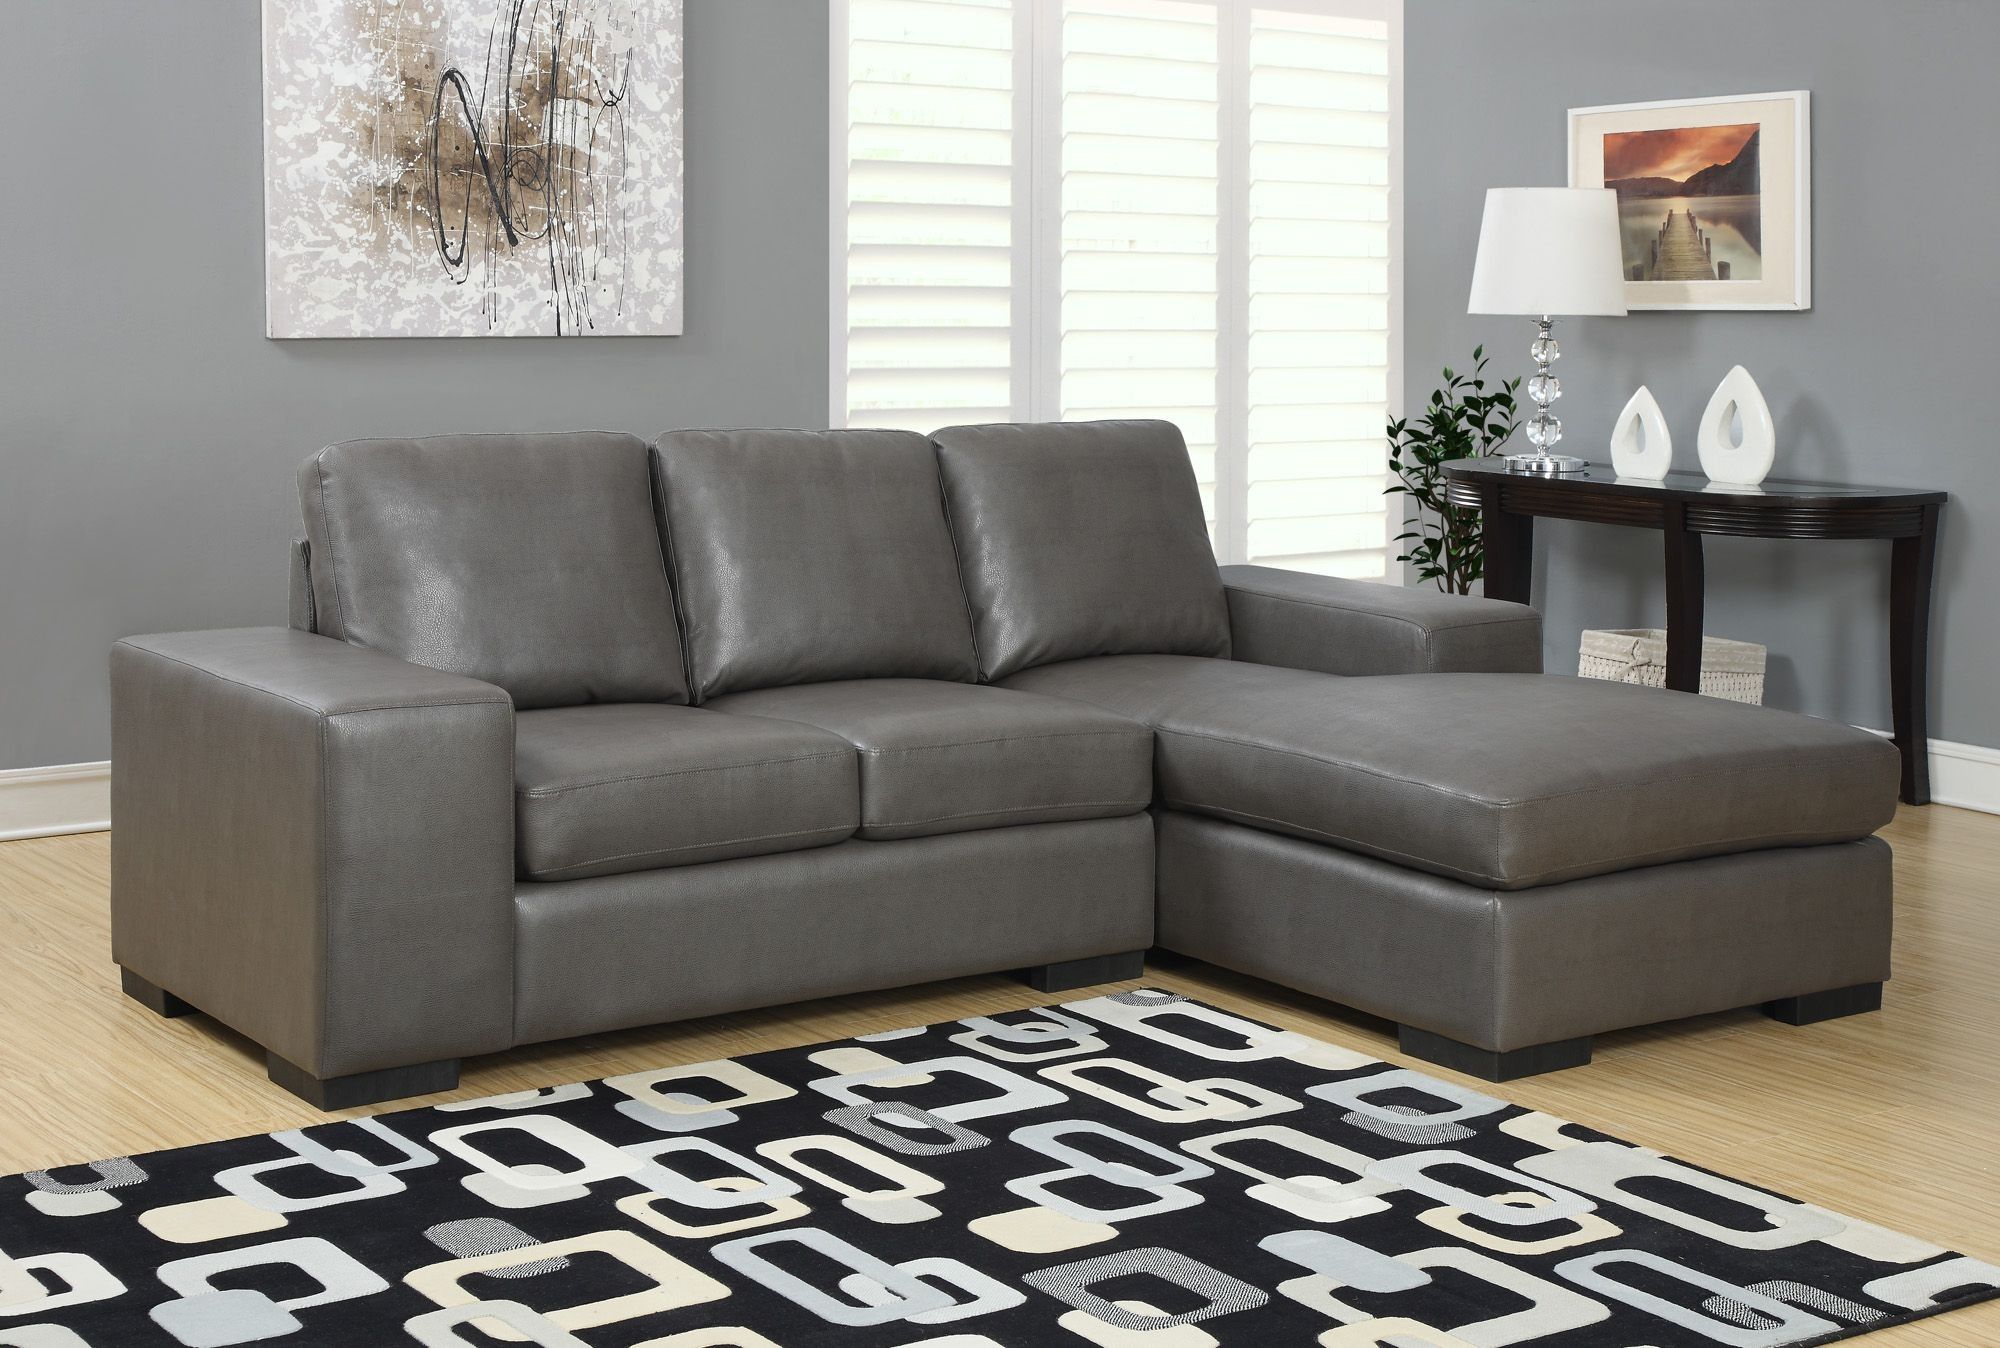 Charcoal Gray Bonded Leather/Match Sofa Sectional From Inside Charcoal Grey Sofas (View 11 of 15)